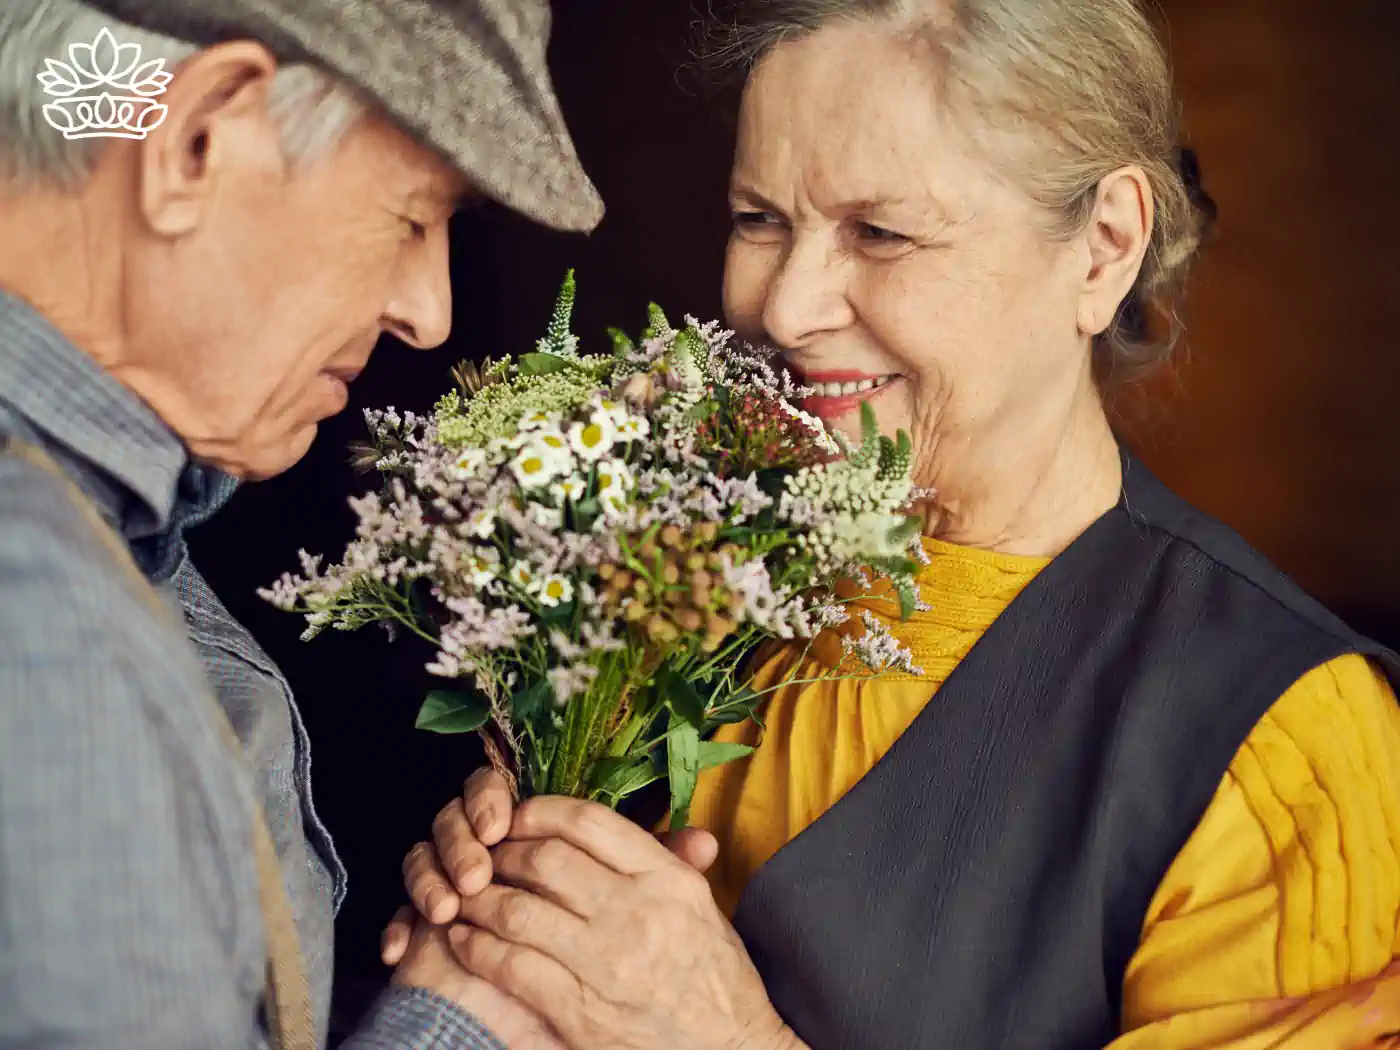 Elderly couple enjoying a beautiful bouquet of flowers with a soft, loving expression. Fabulous Flowers and Gifts, Luxury Flower Arrangements.